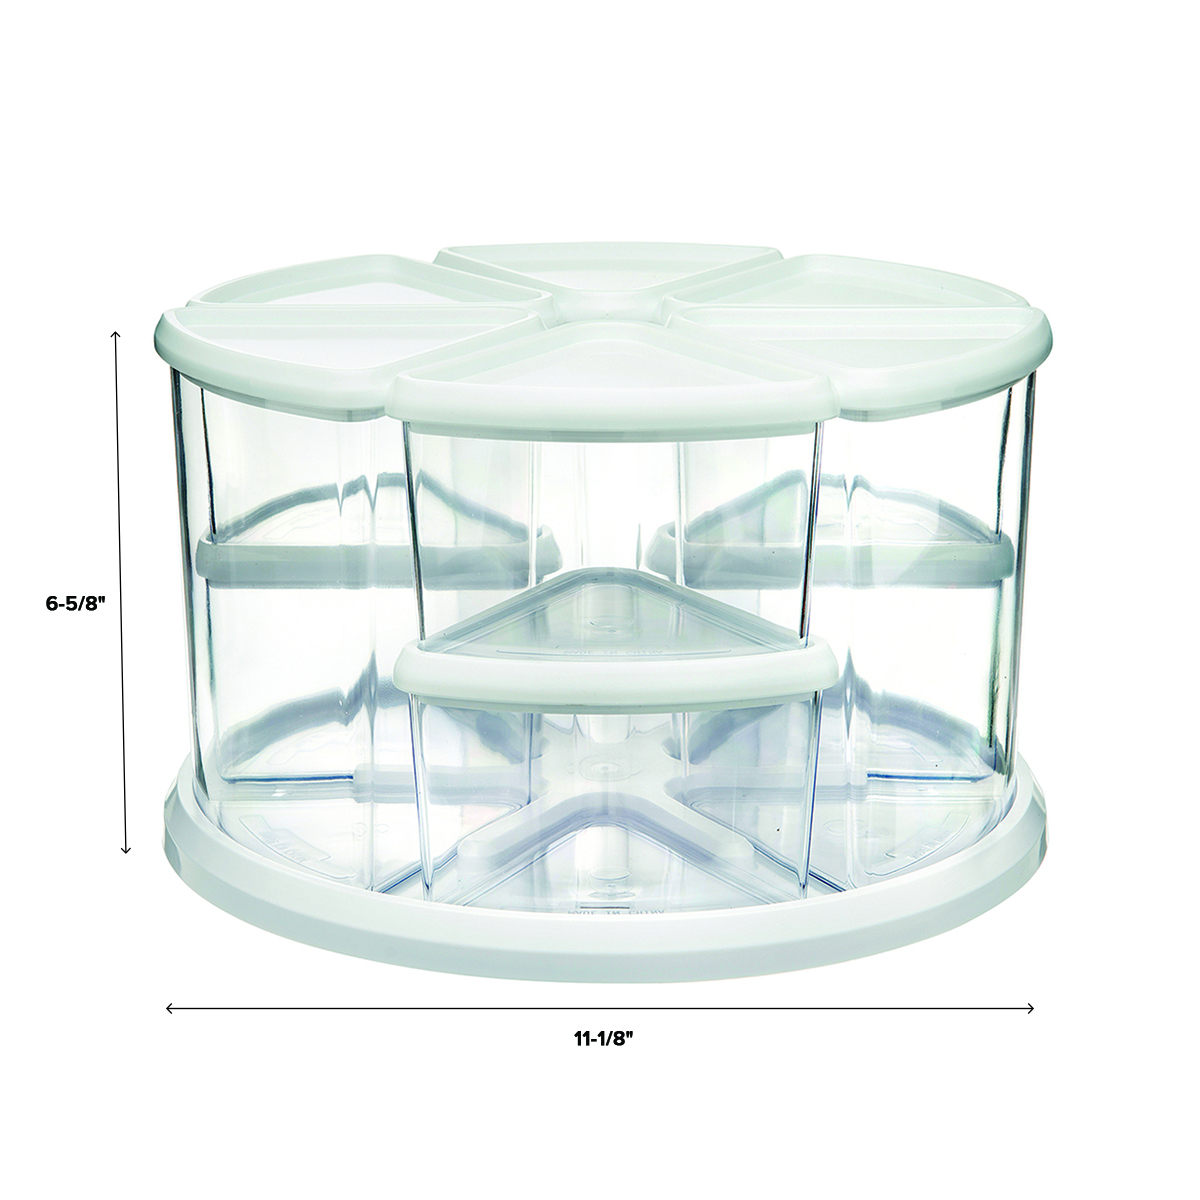 https://www.containerstore.com/catalogimages/453036/10080741-Deflecto-Rotating-Organizer.jpg